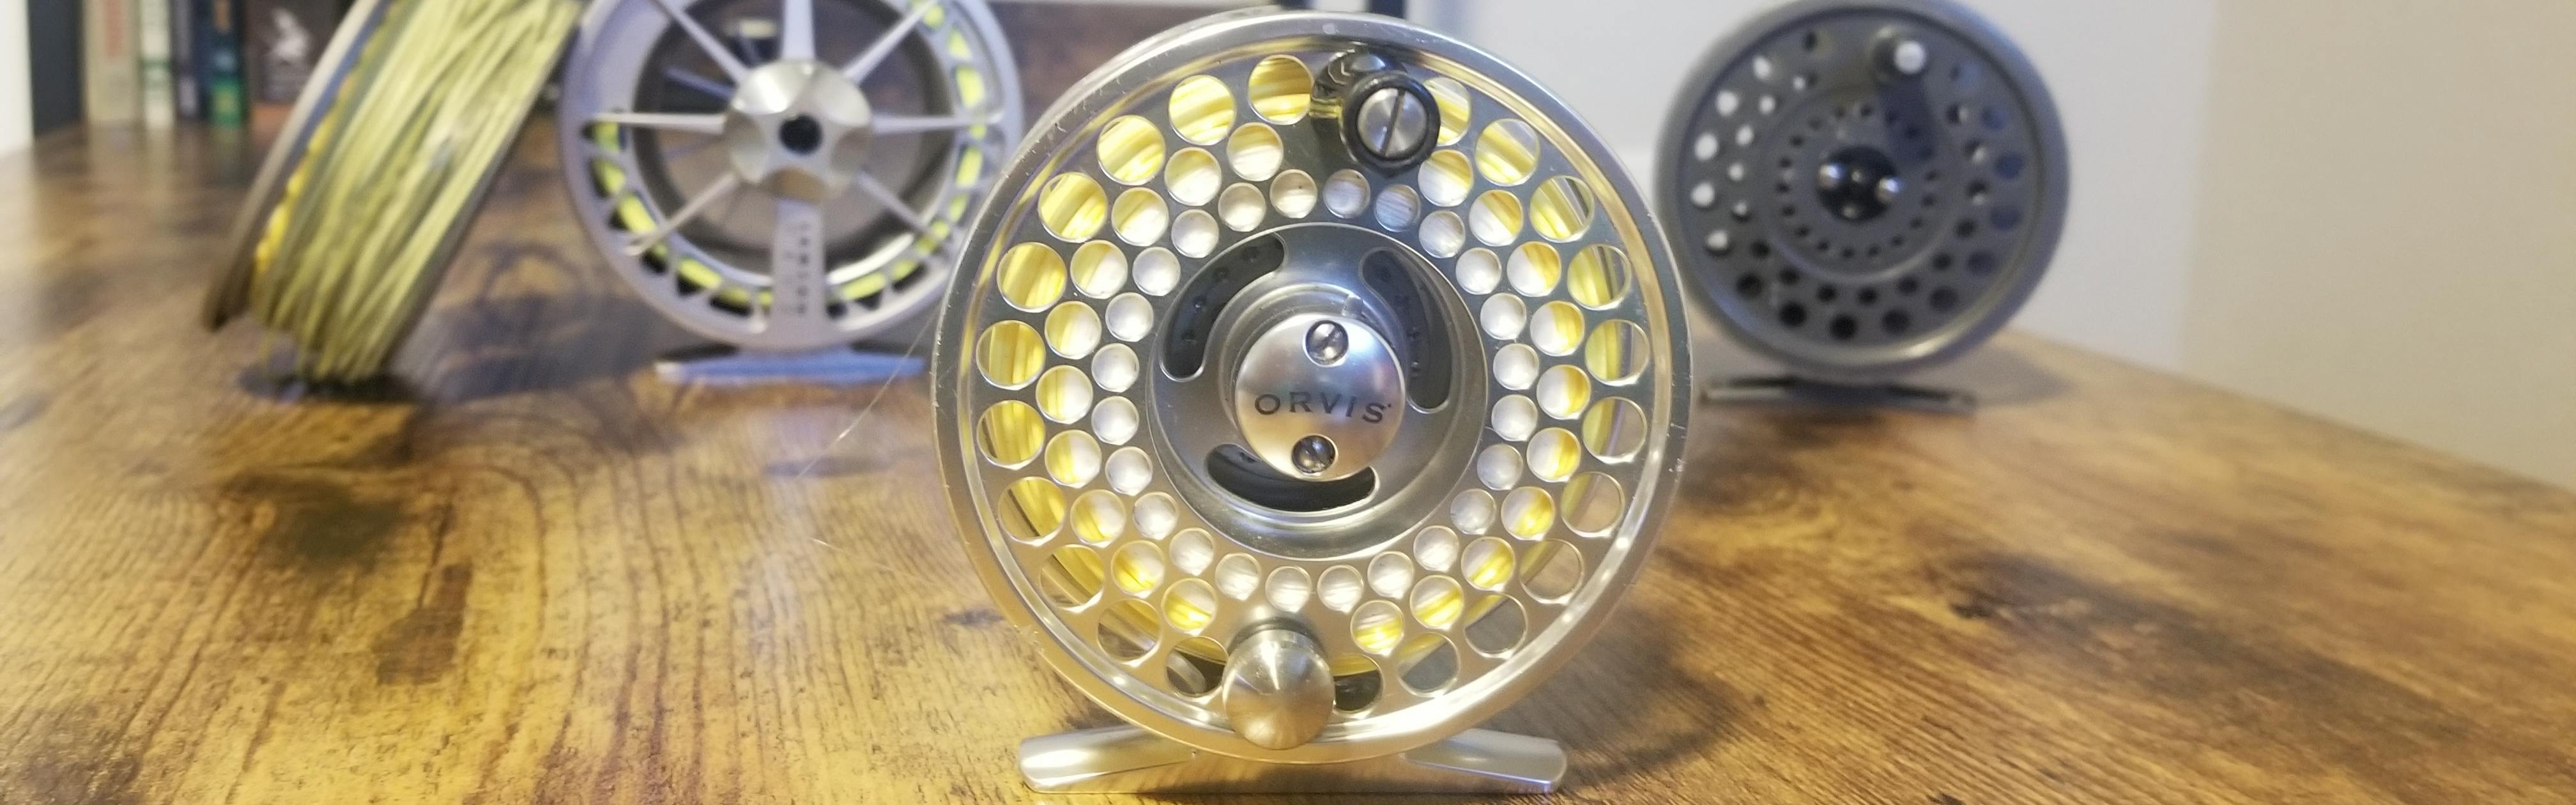 Best Fly Fishing Reels 2019 Buyer's Guide & Review